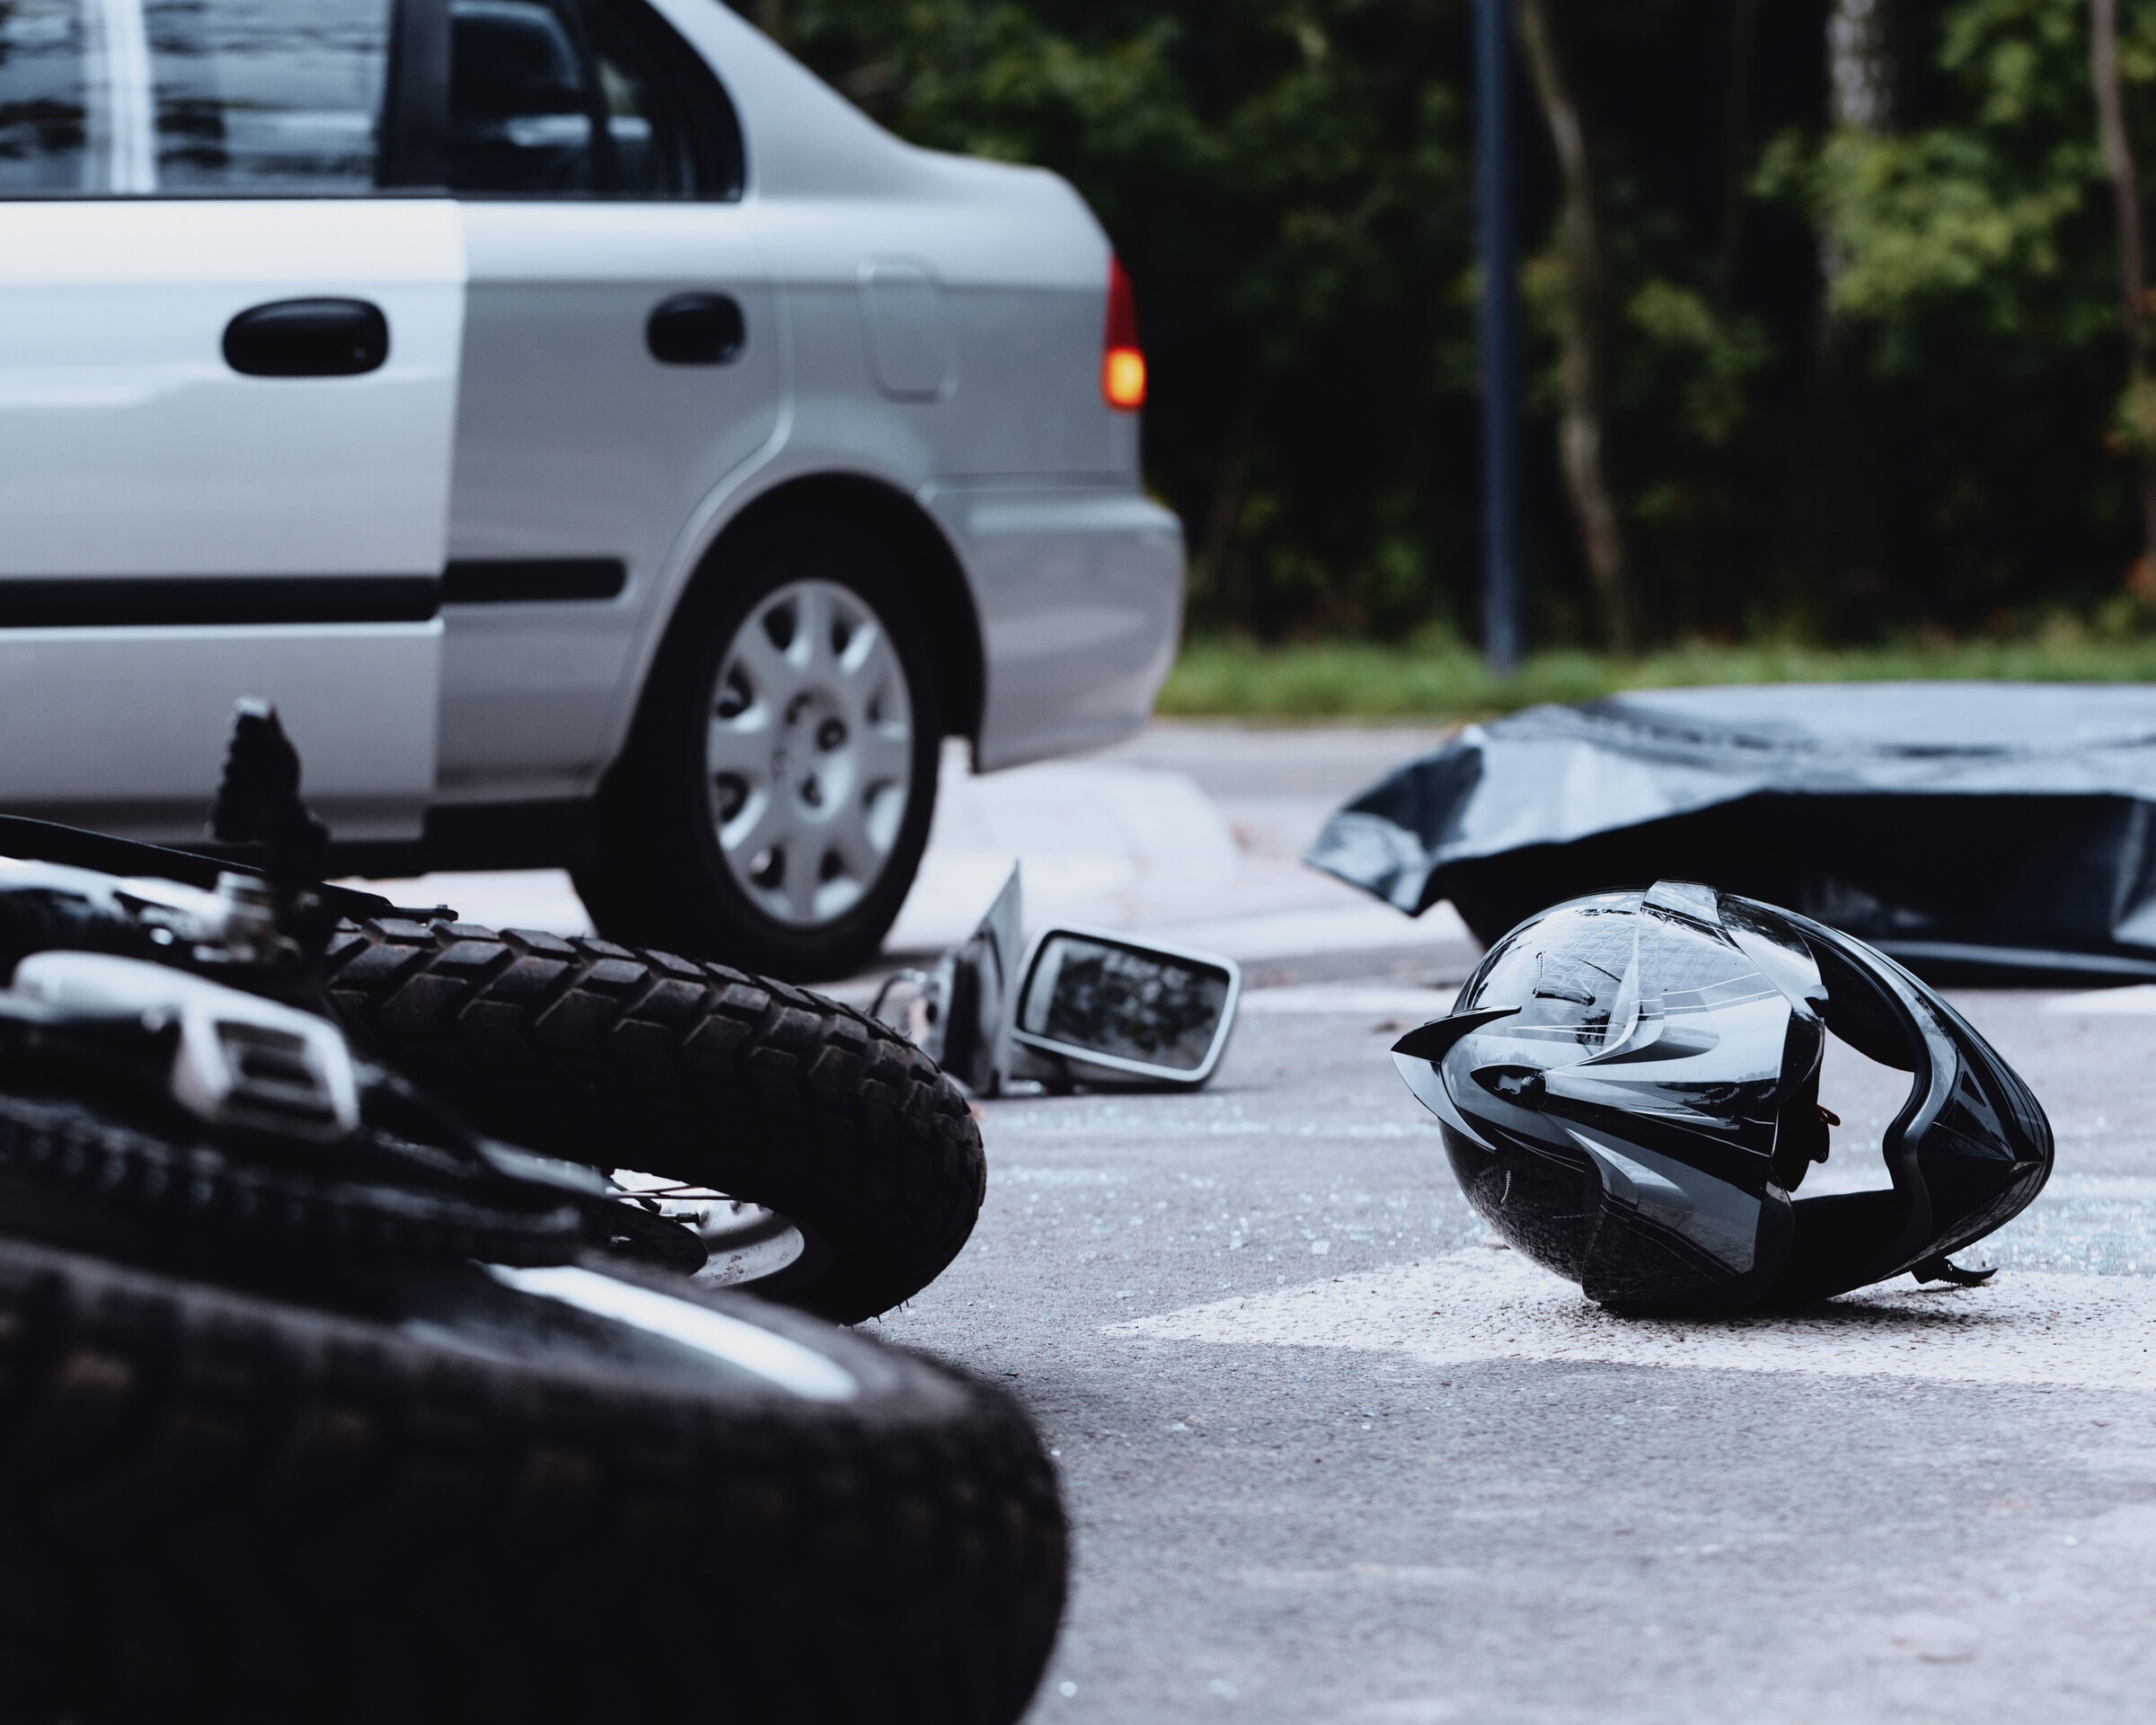 Reliable lawyers who are dedicated to providing support and guidance to those affected by car and motor vehicle accidents in Beverly Hills